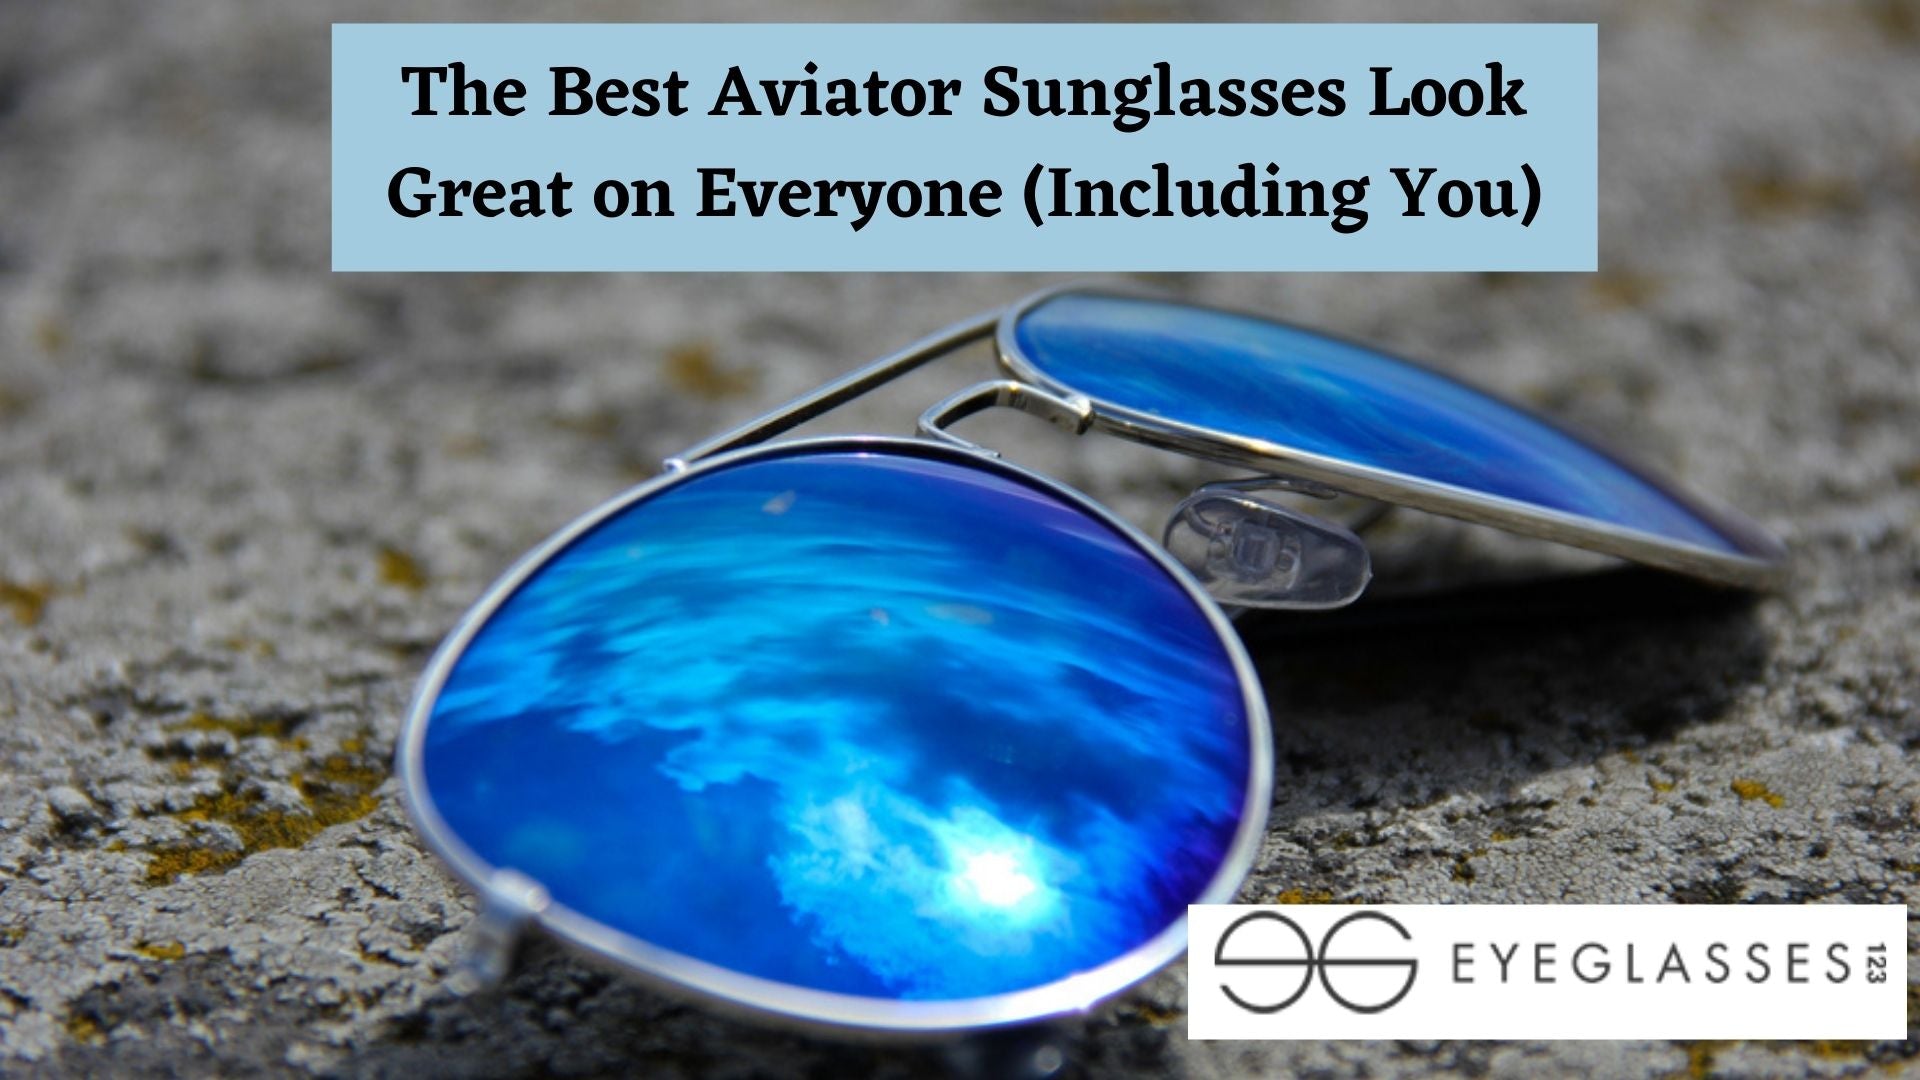 The Best Aviator Sunglasses Look Great on Everyone (Including You)